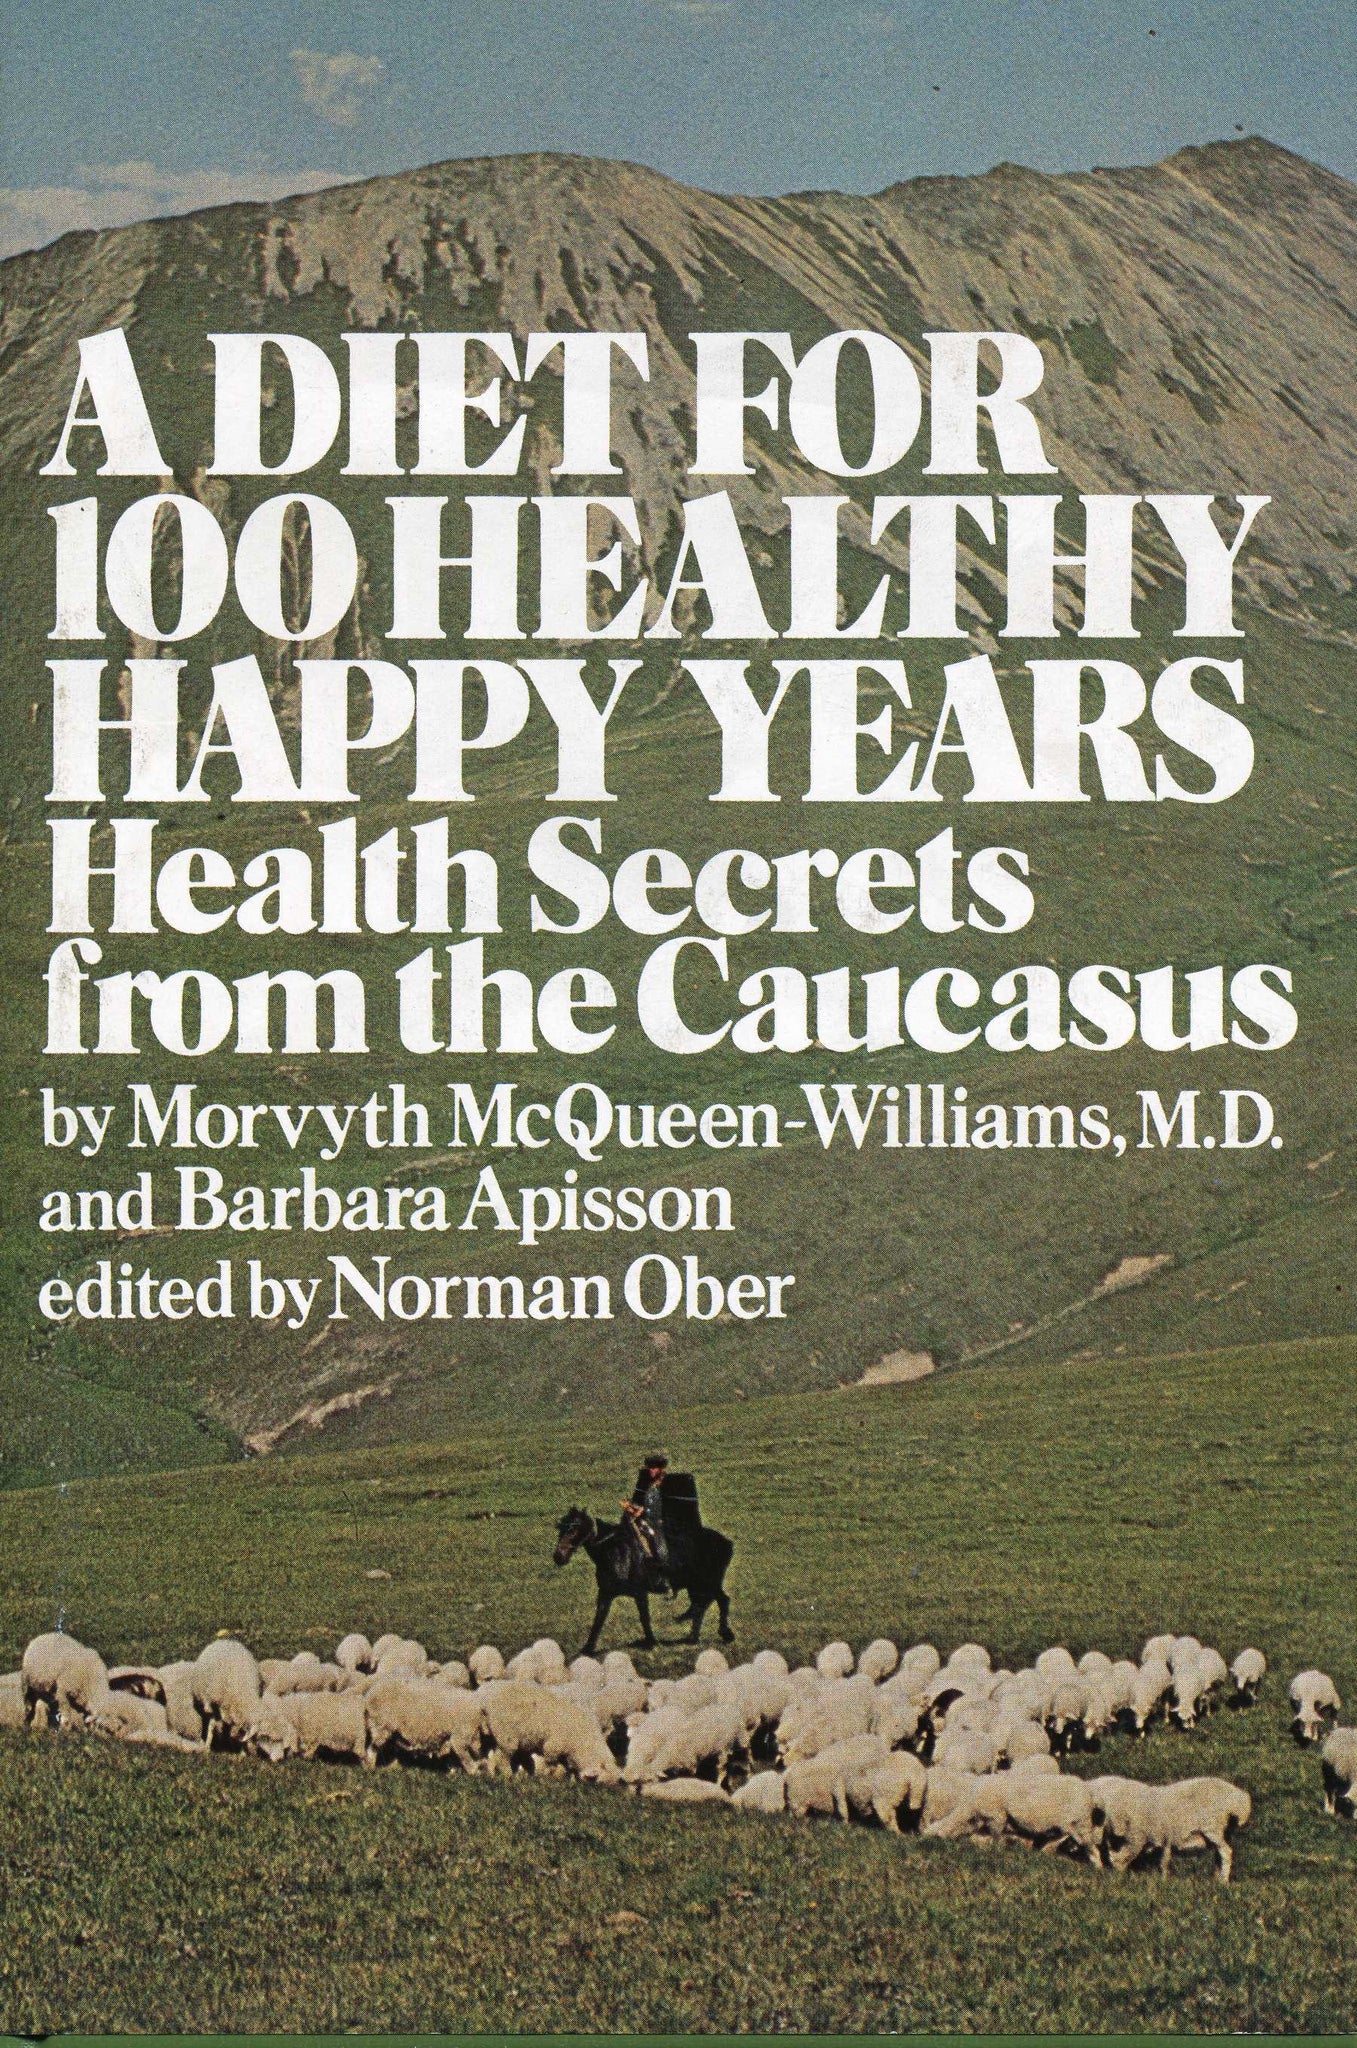 DIET FOR 100 HEALTHY HAPPY YEARS: Health Secrets from the Caucasus